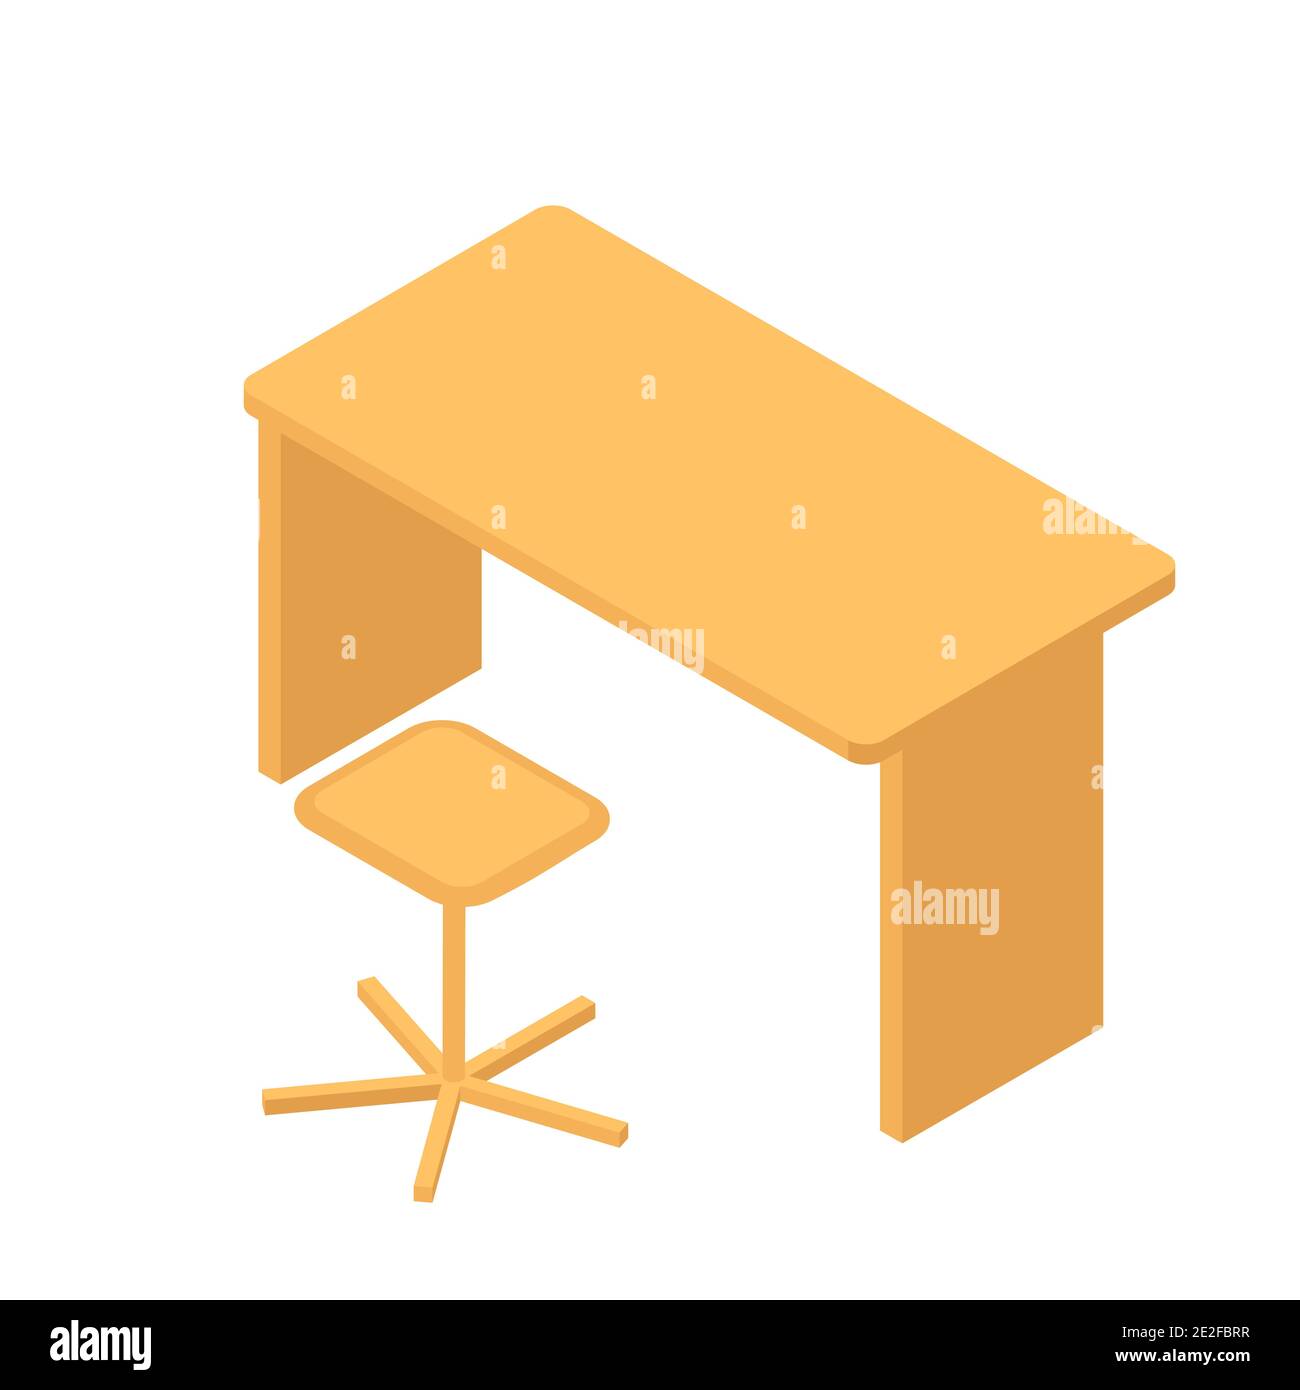 Desk and chair isometric vector illustration Stock Vector